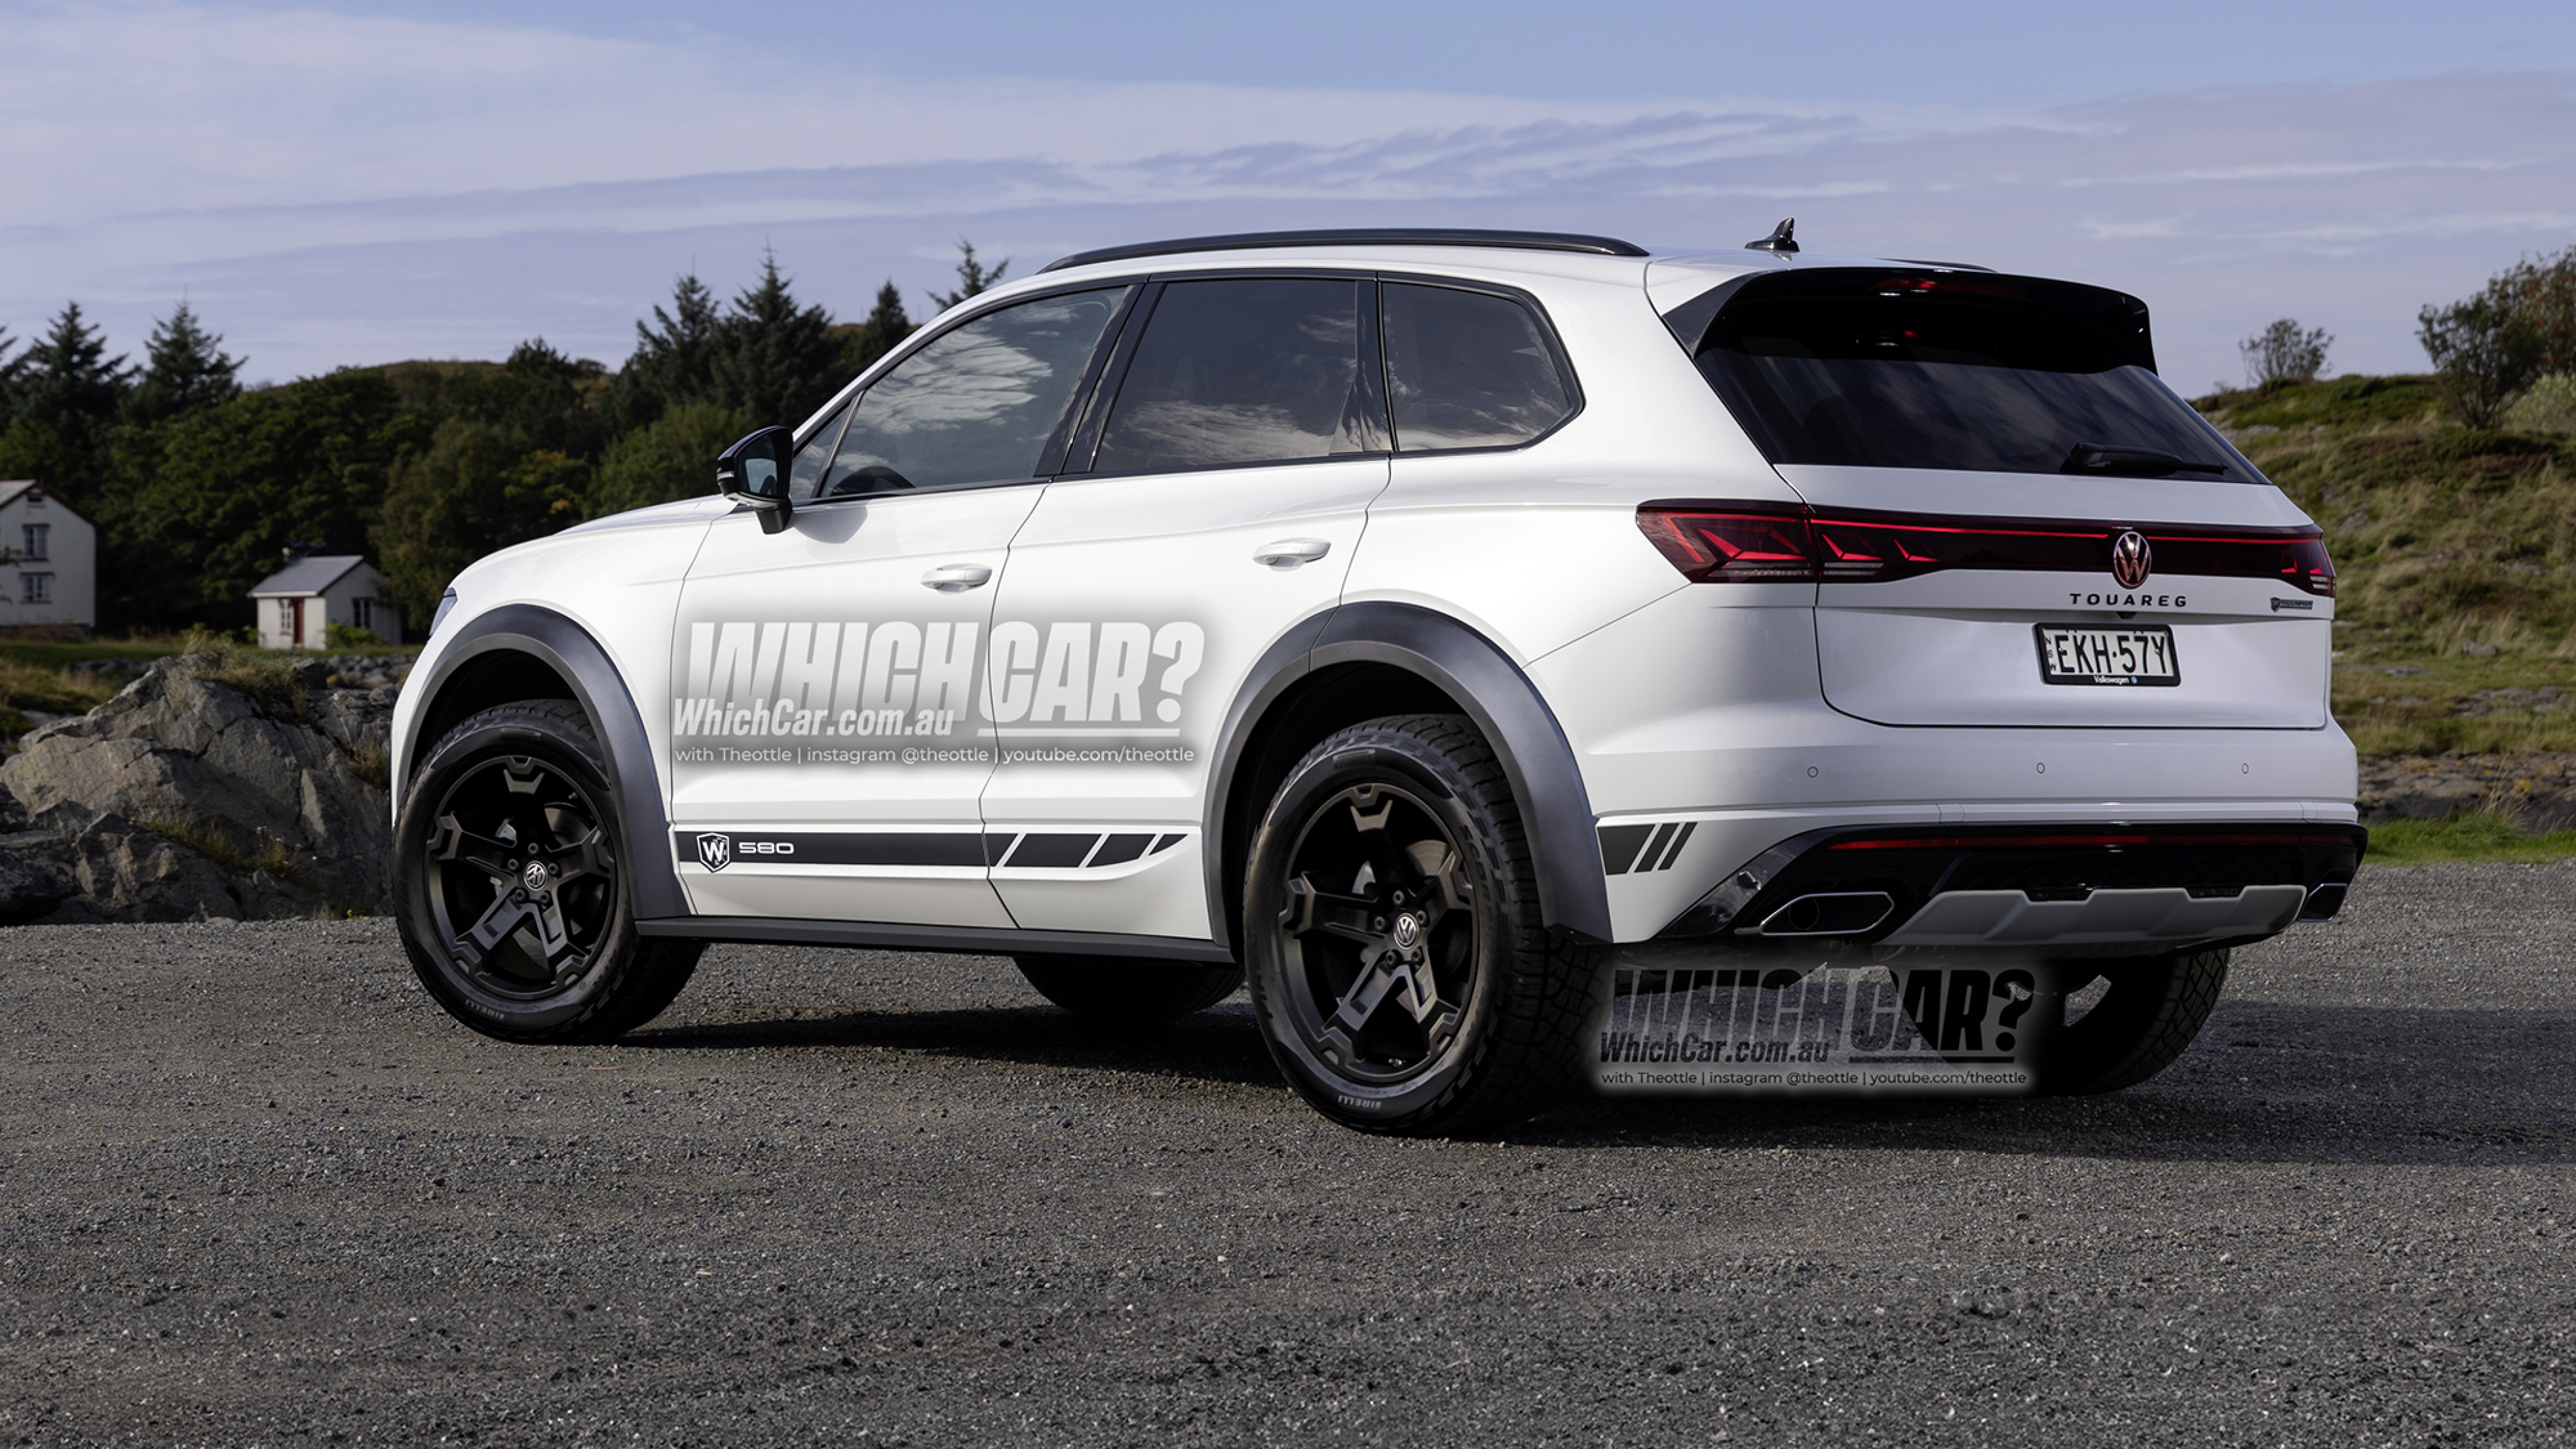 ad7924a9/2025 volkswagen touareg walkinshaw rendering theottle whichcar australia 02 png